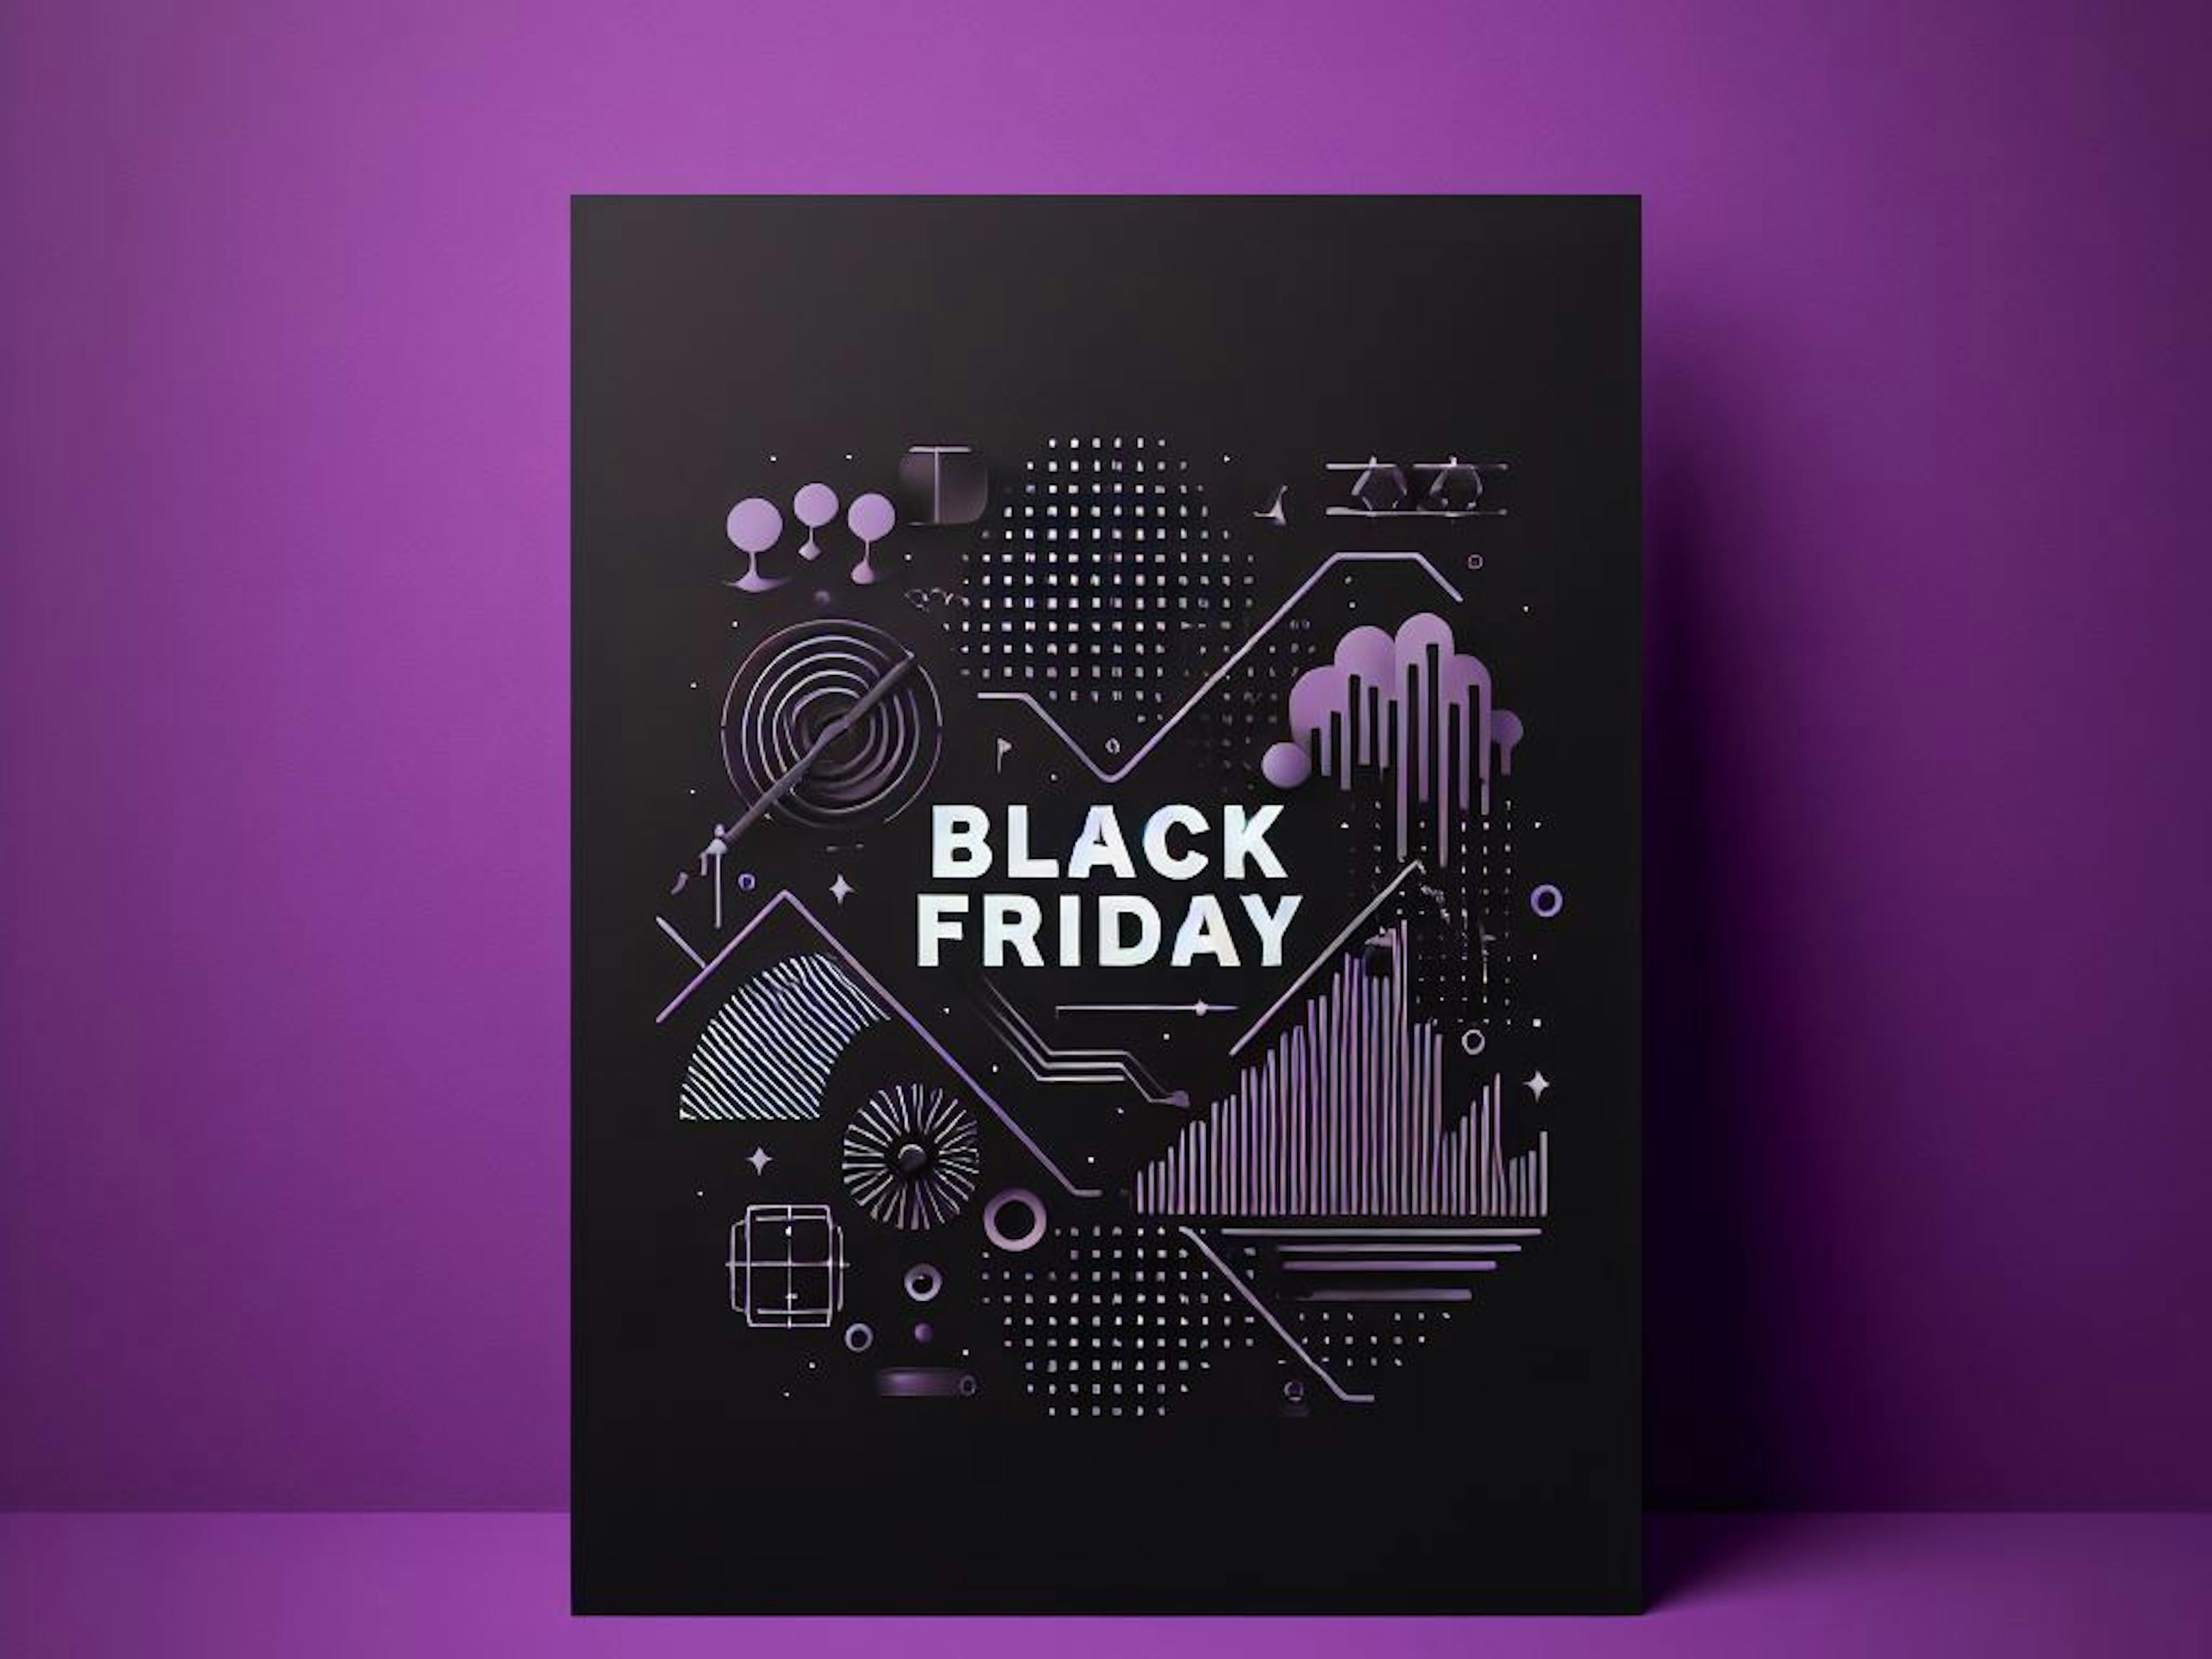 A black tablet on a purple background, black friday written on it. 